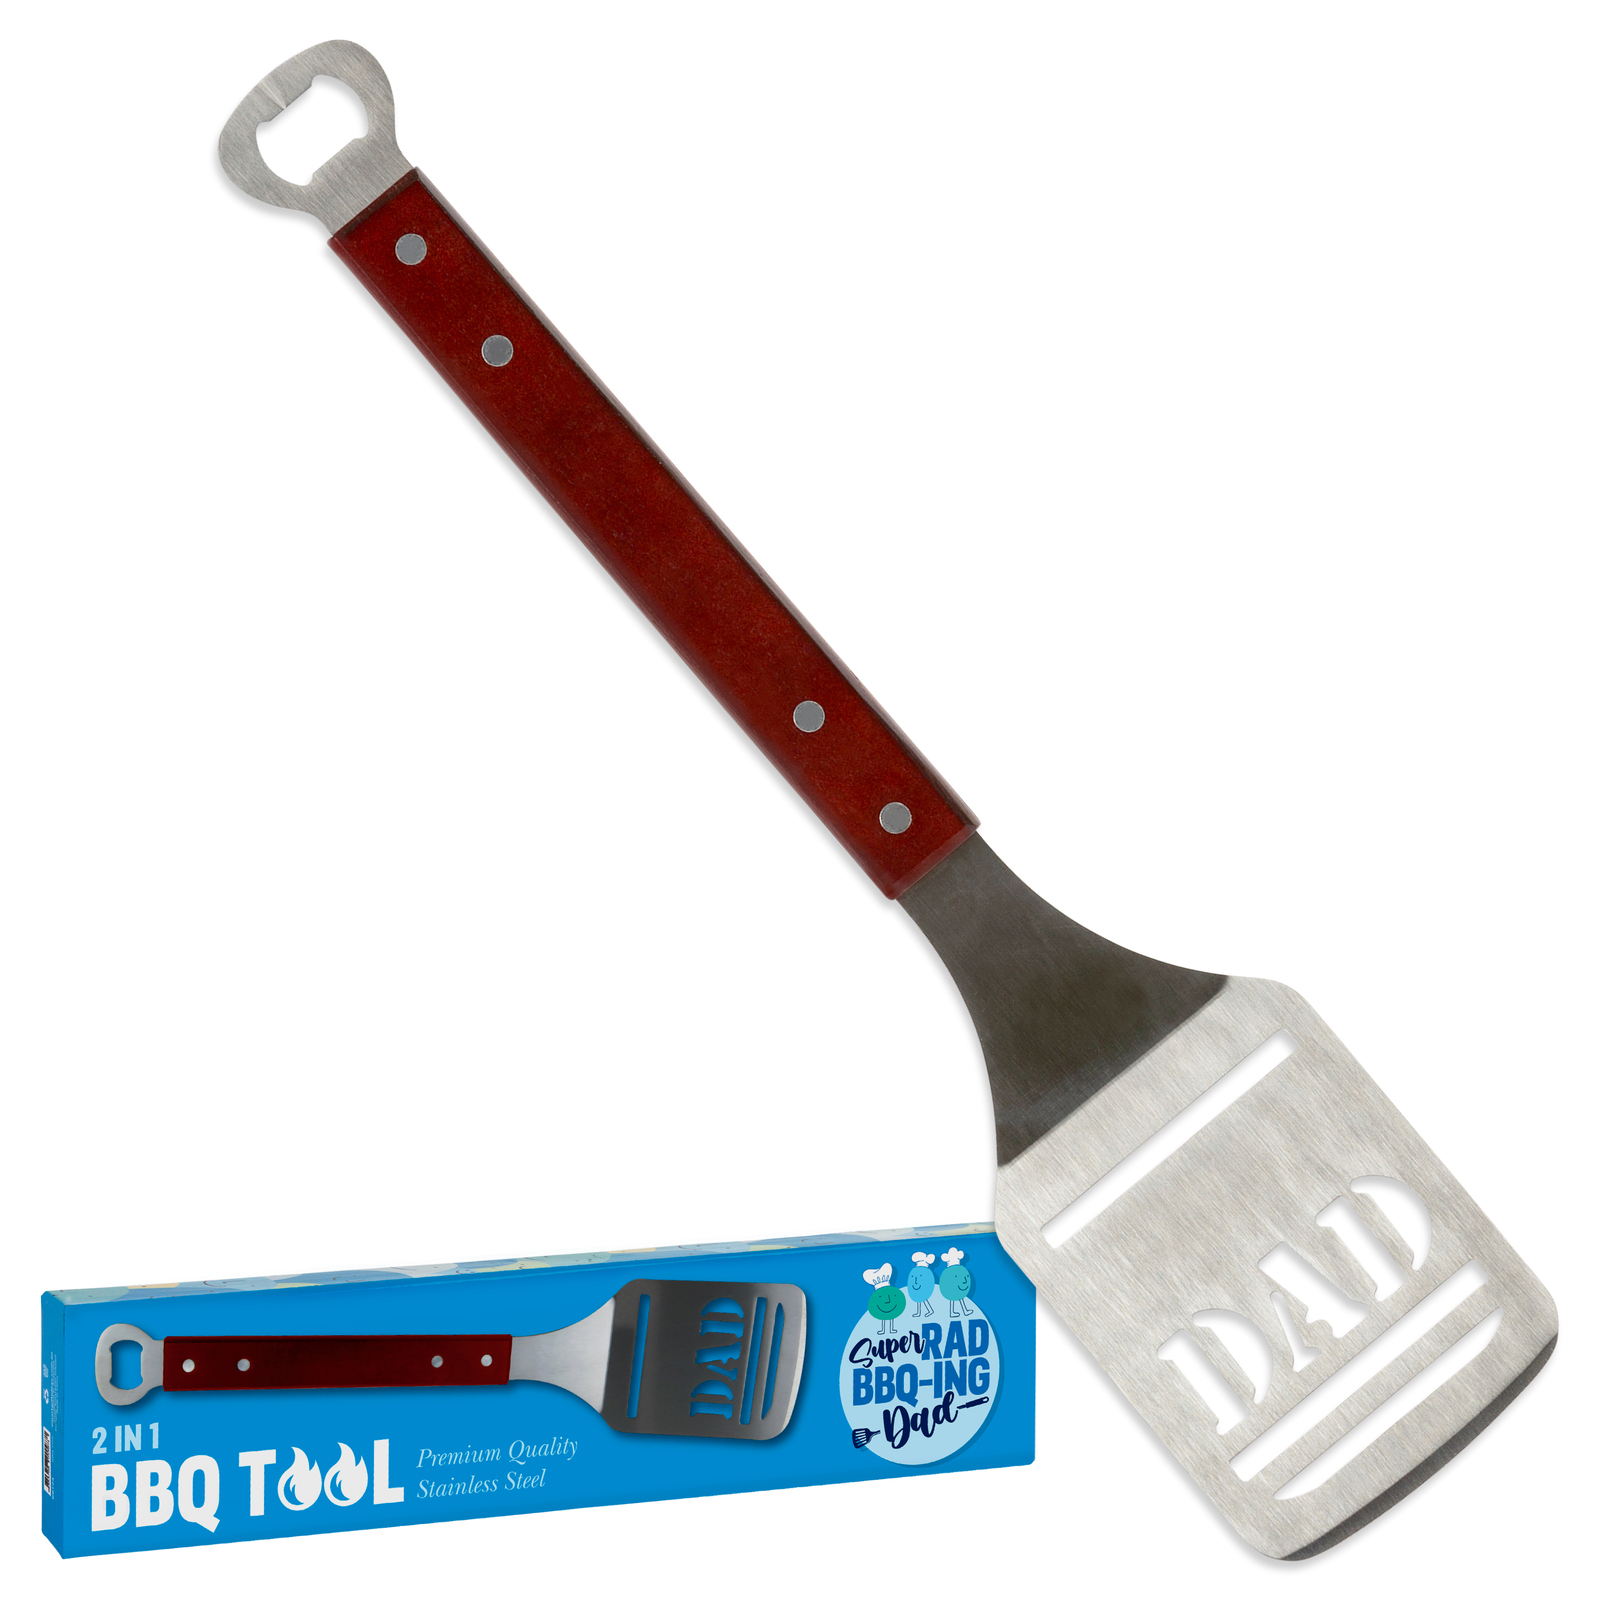 2 in 1 BBQ Tool